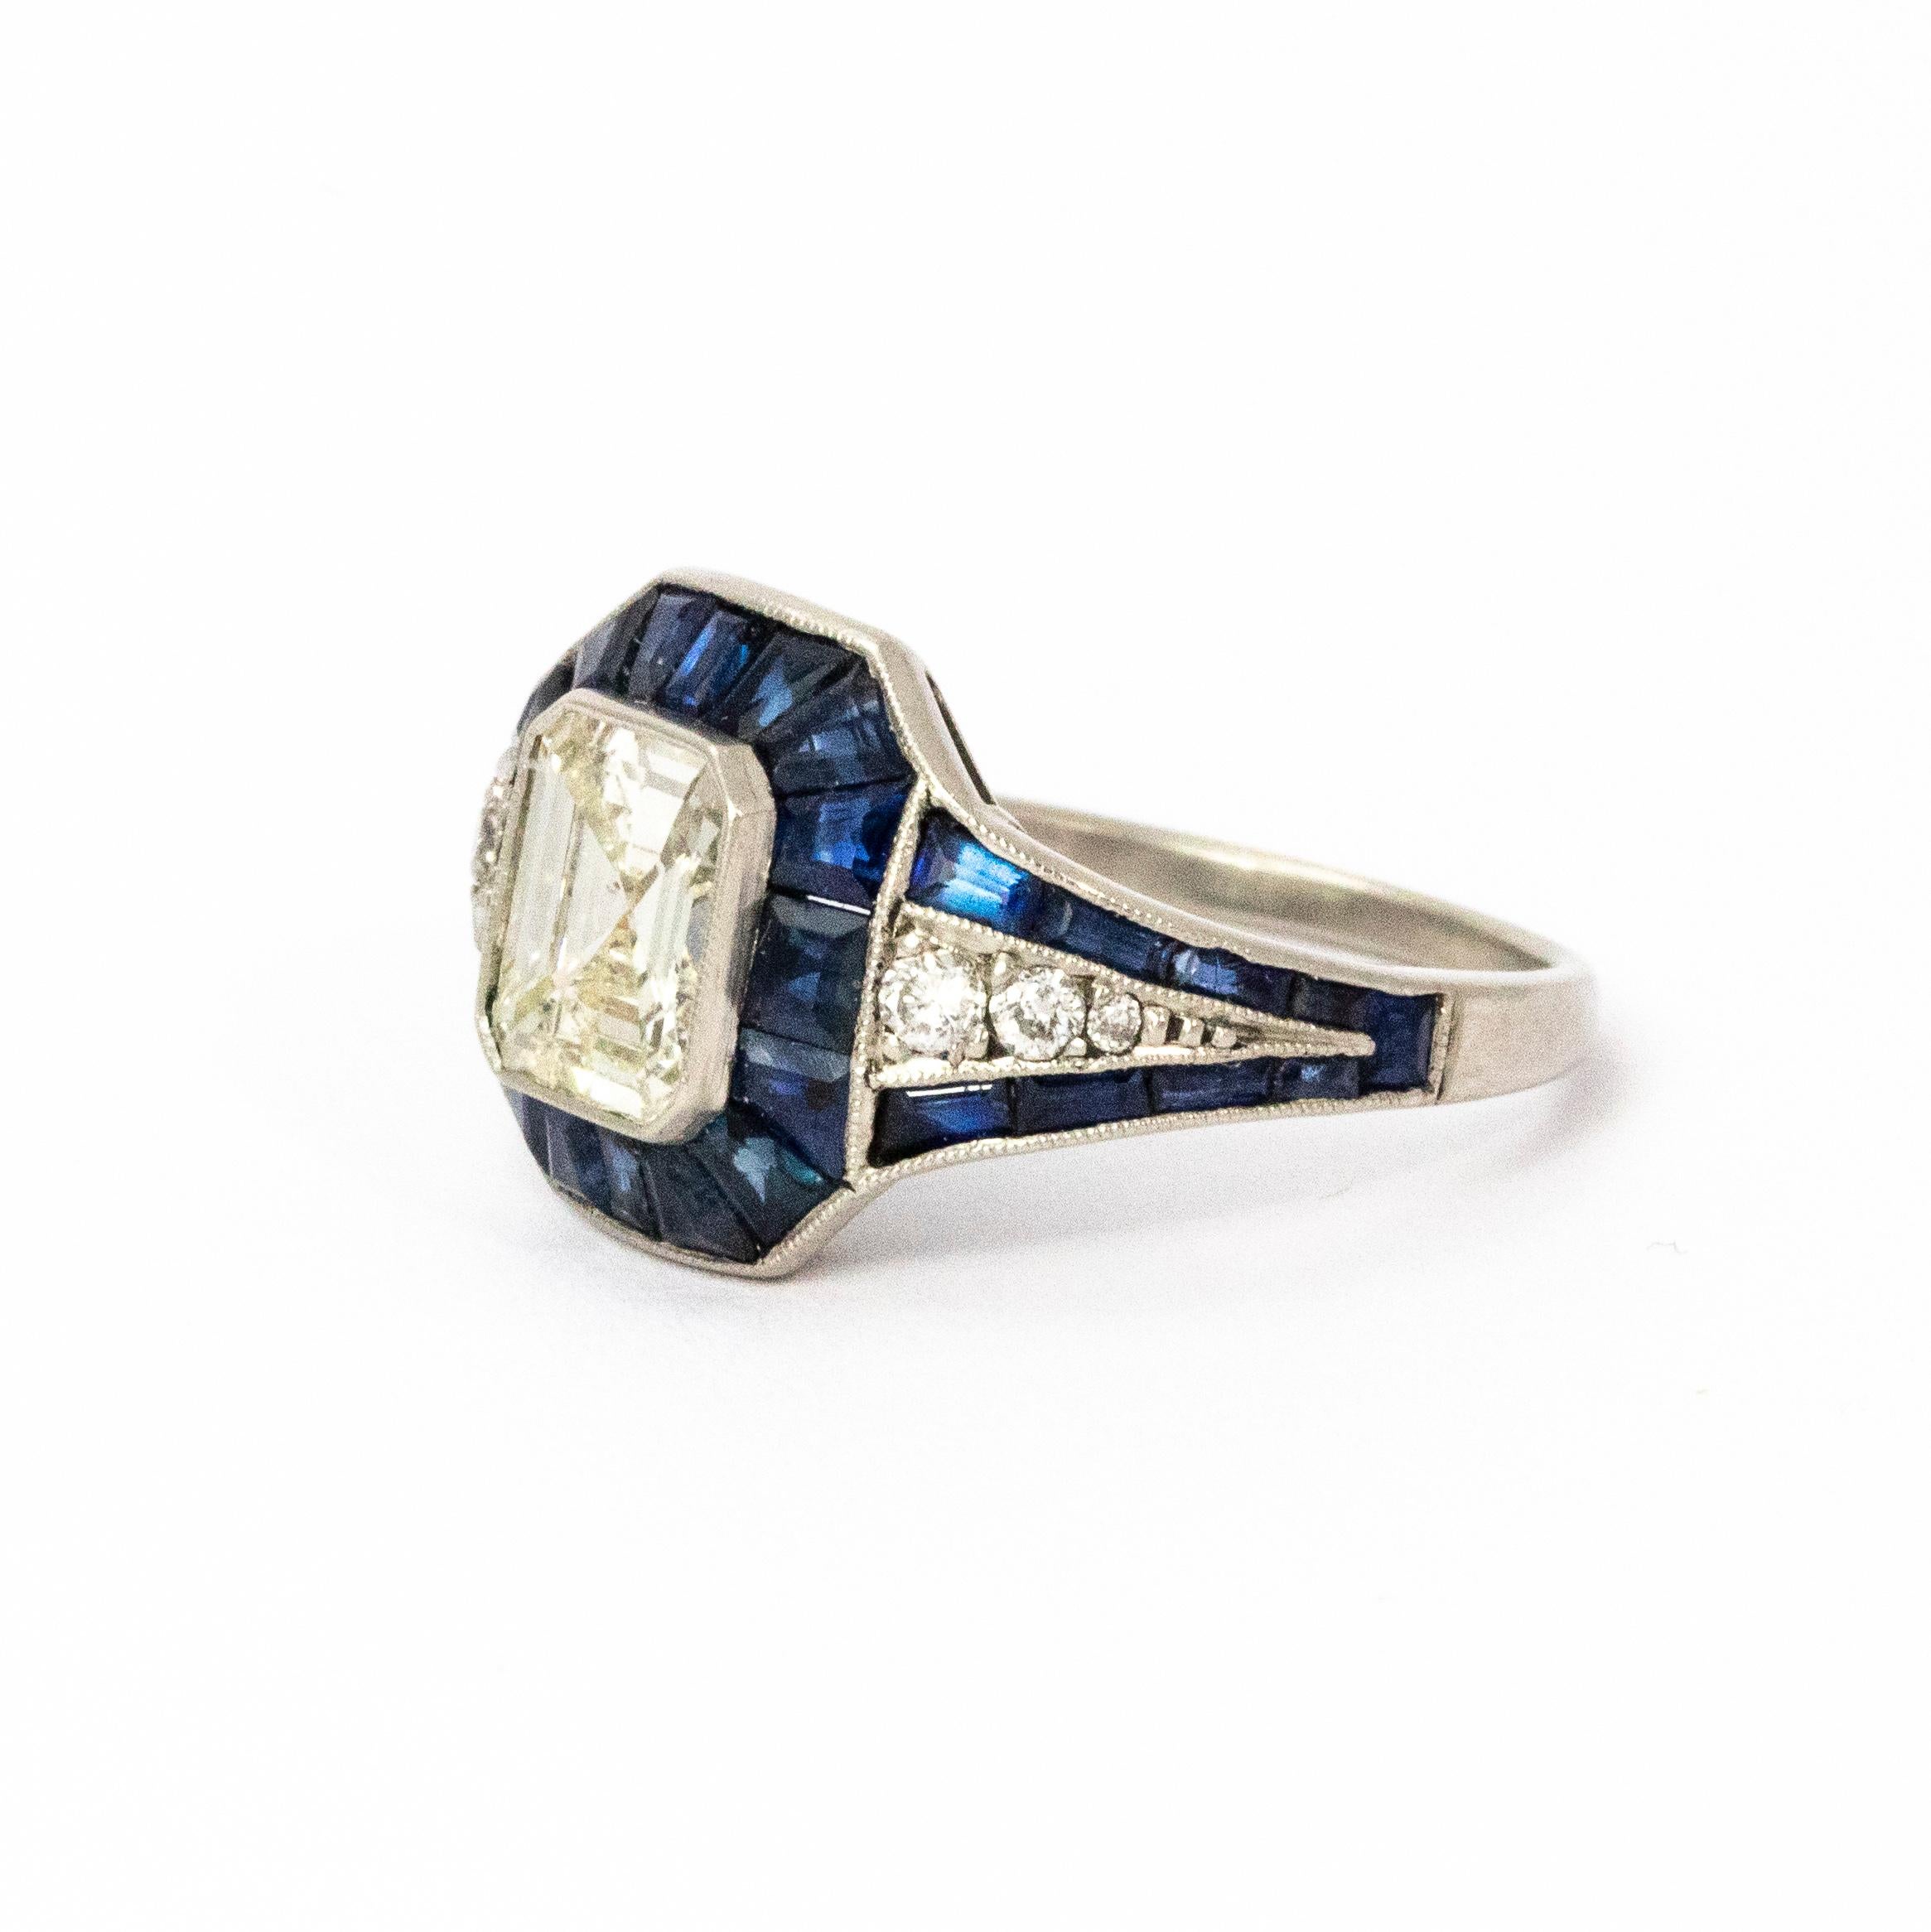 Absolute show stopper! This stunning ring has a centre emerald cut diamond weighing 1.74 carats, colour J SI-1 and is surrounded by beautiful sapphires totalling 1.28 carats and set in platinum. 

Ring Size: N or 6 3/4